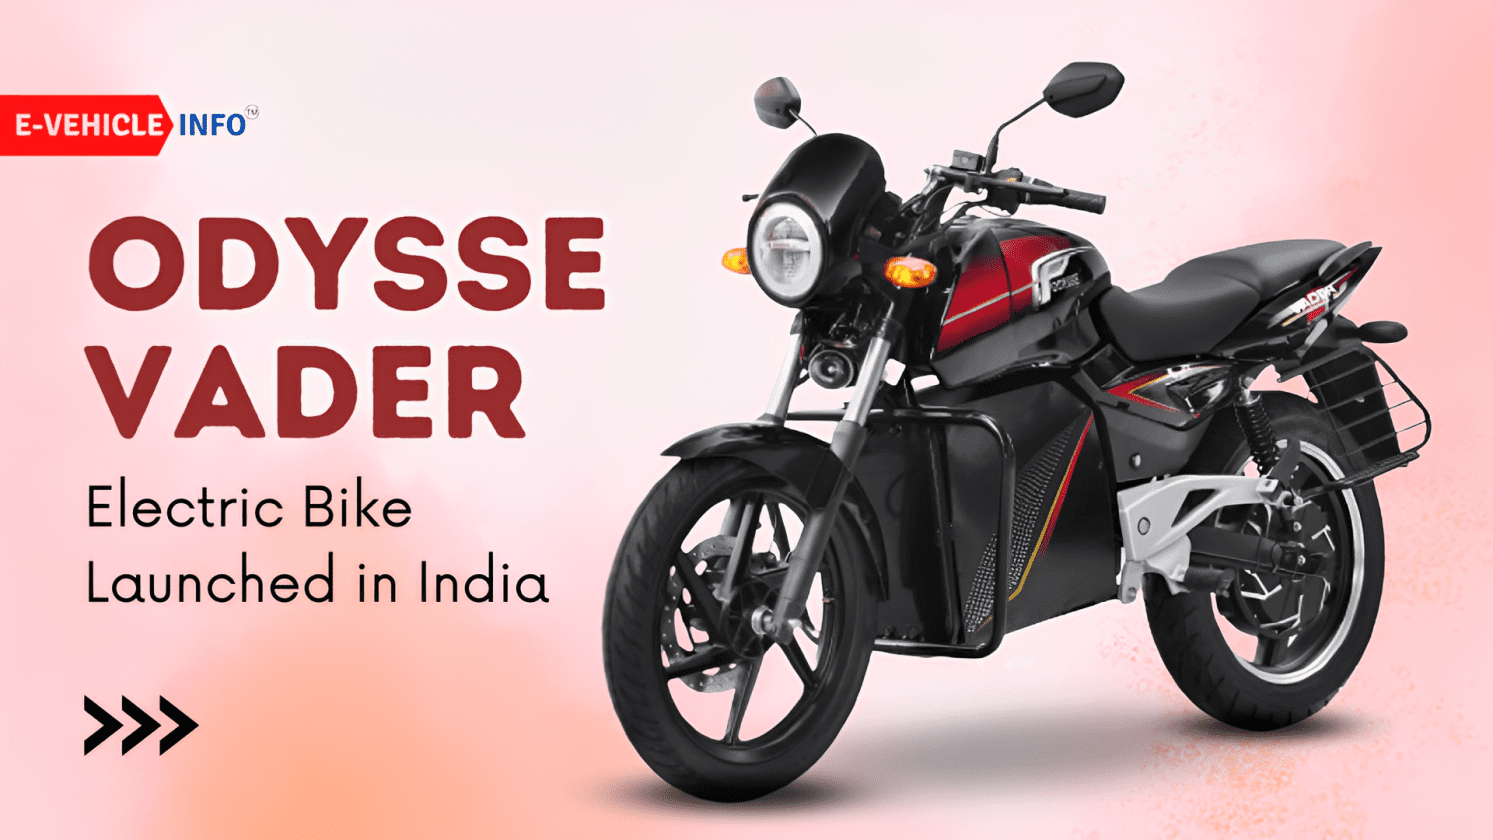 Odysse Vader Electric Bike Launched In India at 1.10 Lakh, Range 125Km